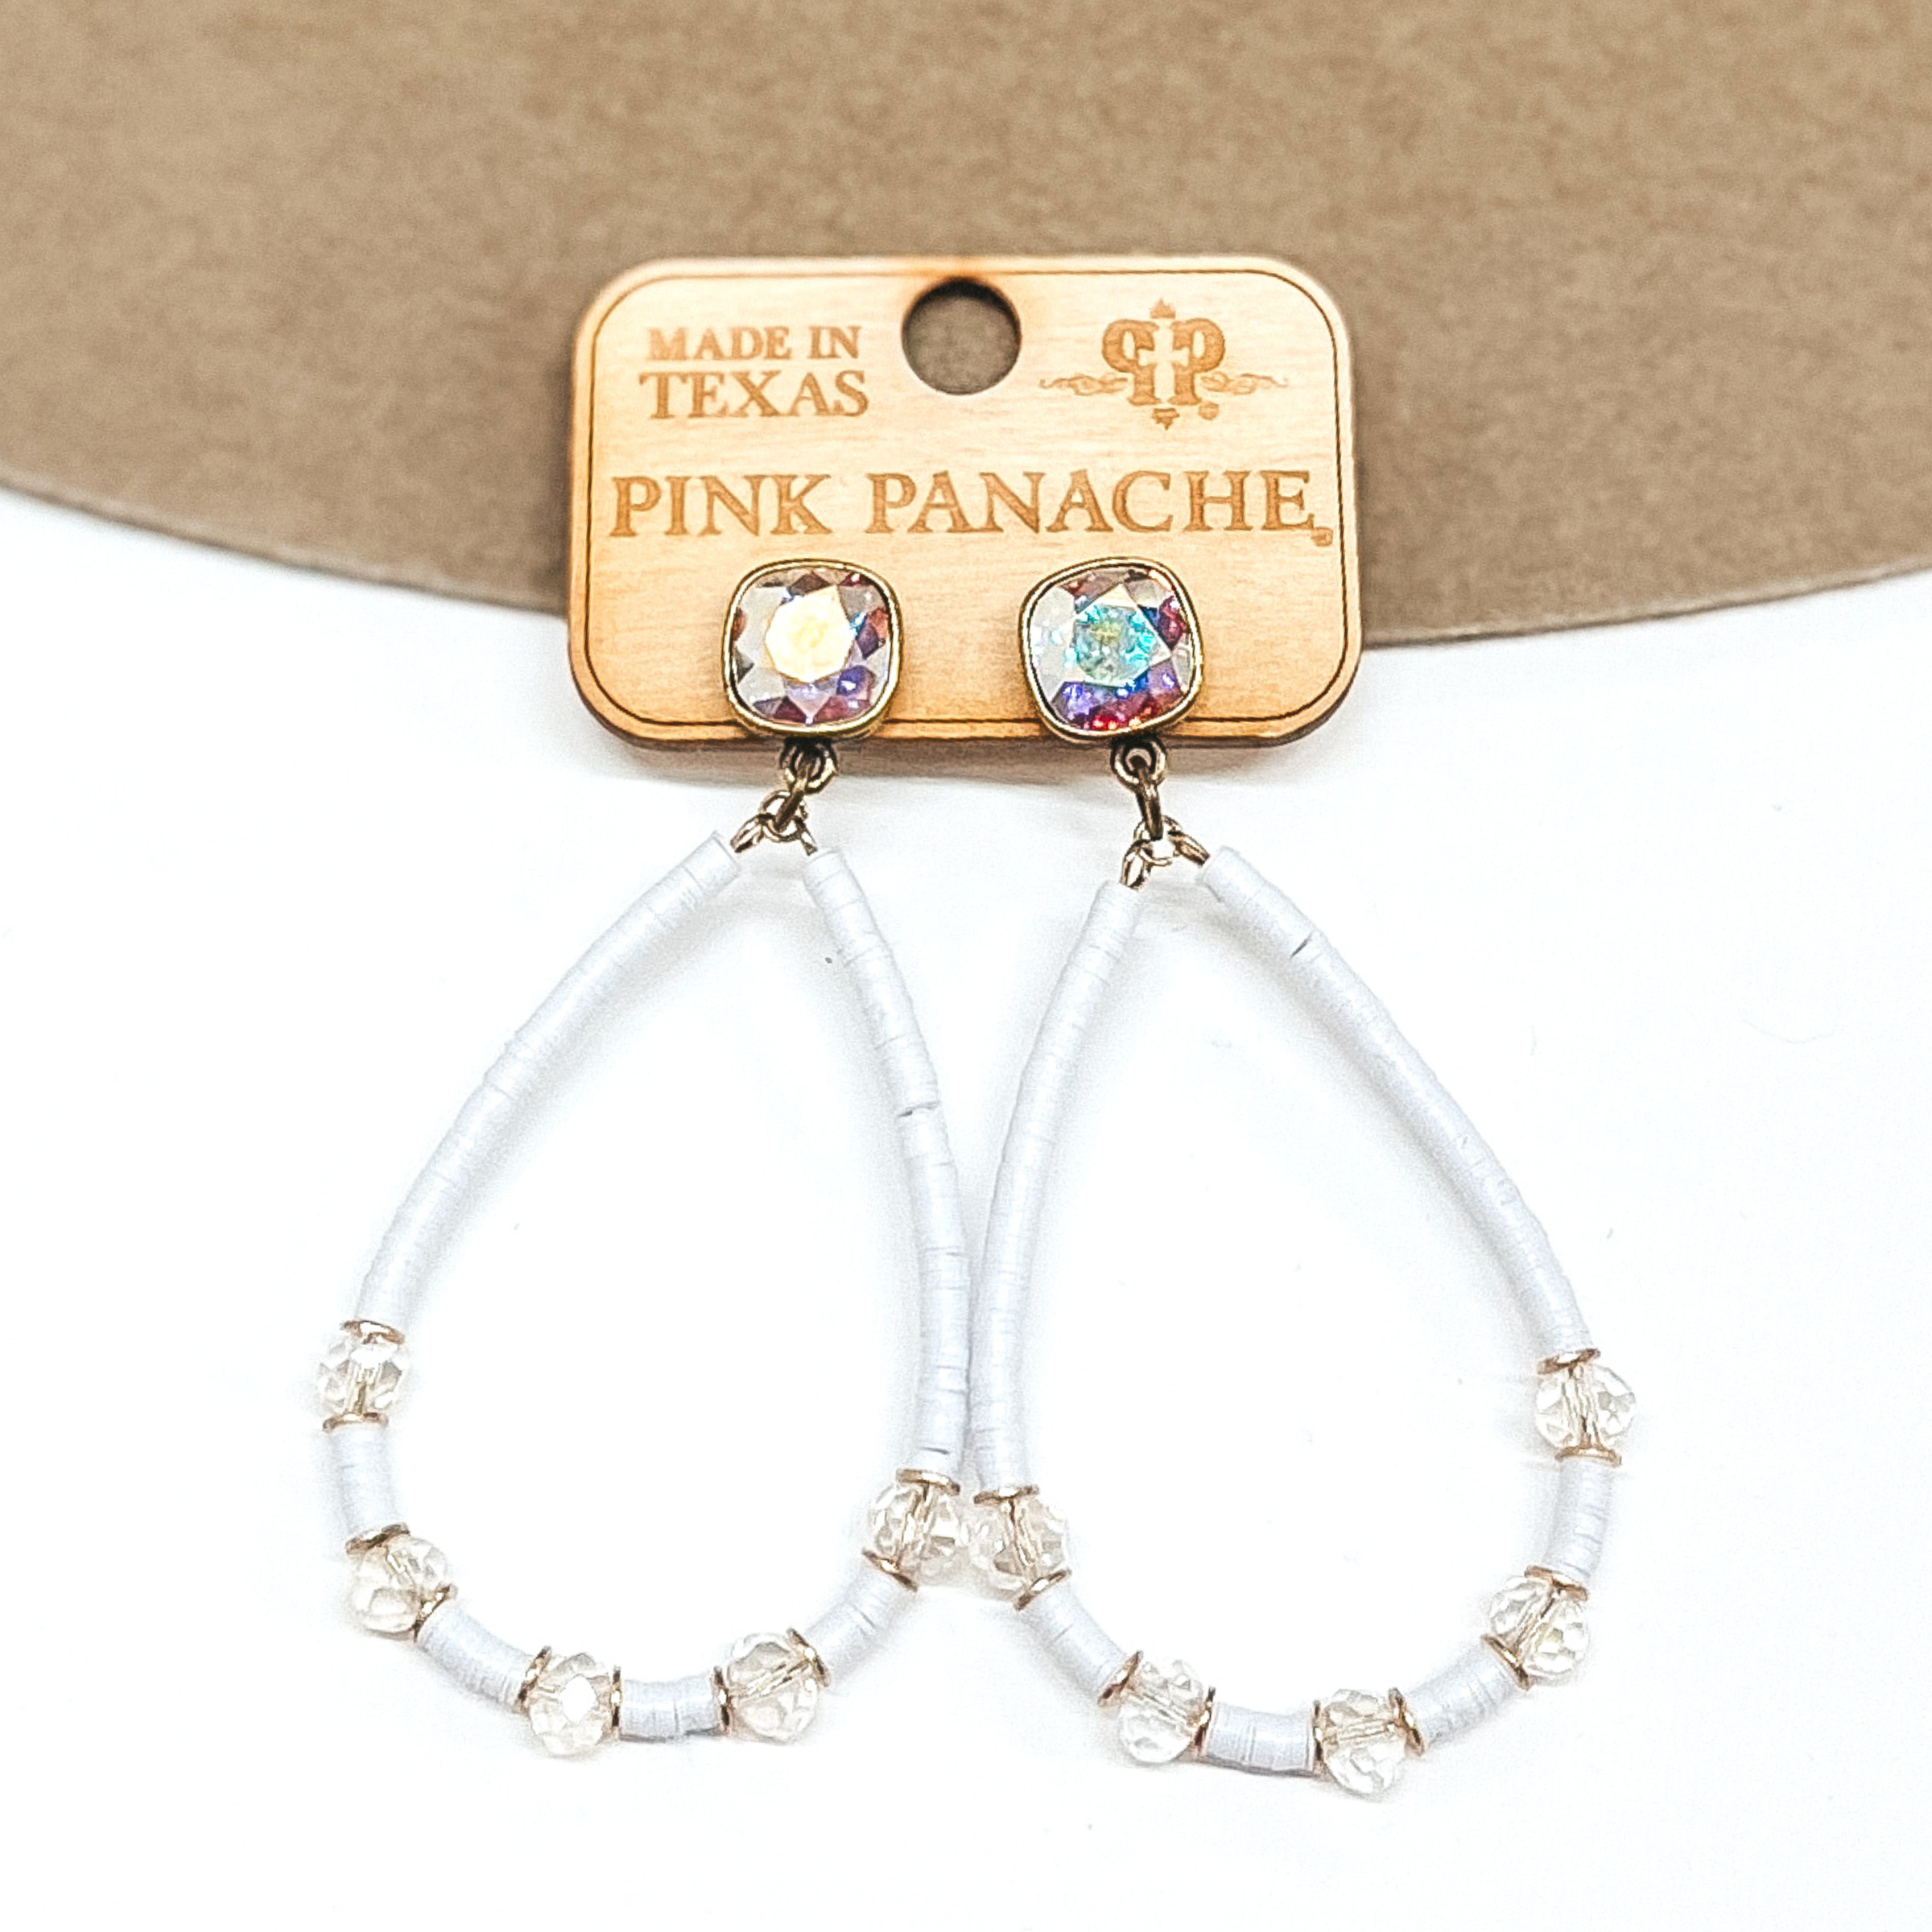 AB cushion cut crystal earrings in a bronze setting. These earrings include a teardrop pendant that has white, rubber disk beads and clear crystal spacers. These earrings are pictured on a tan and white background. 